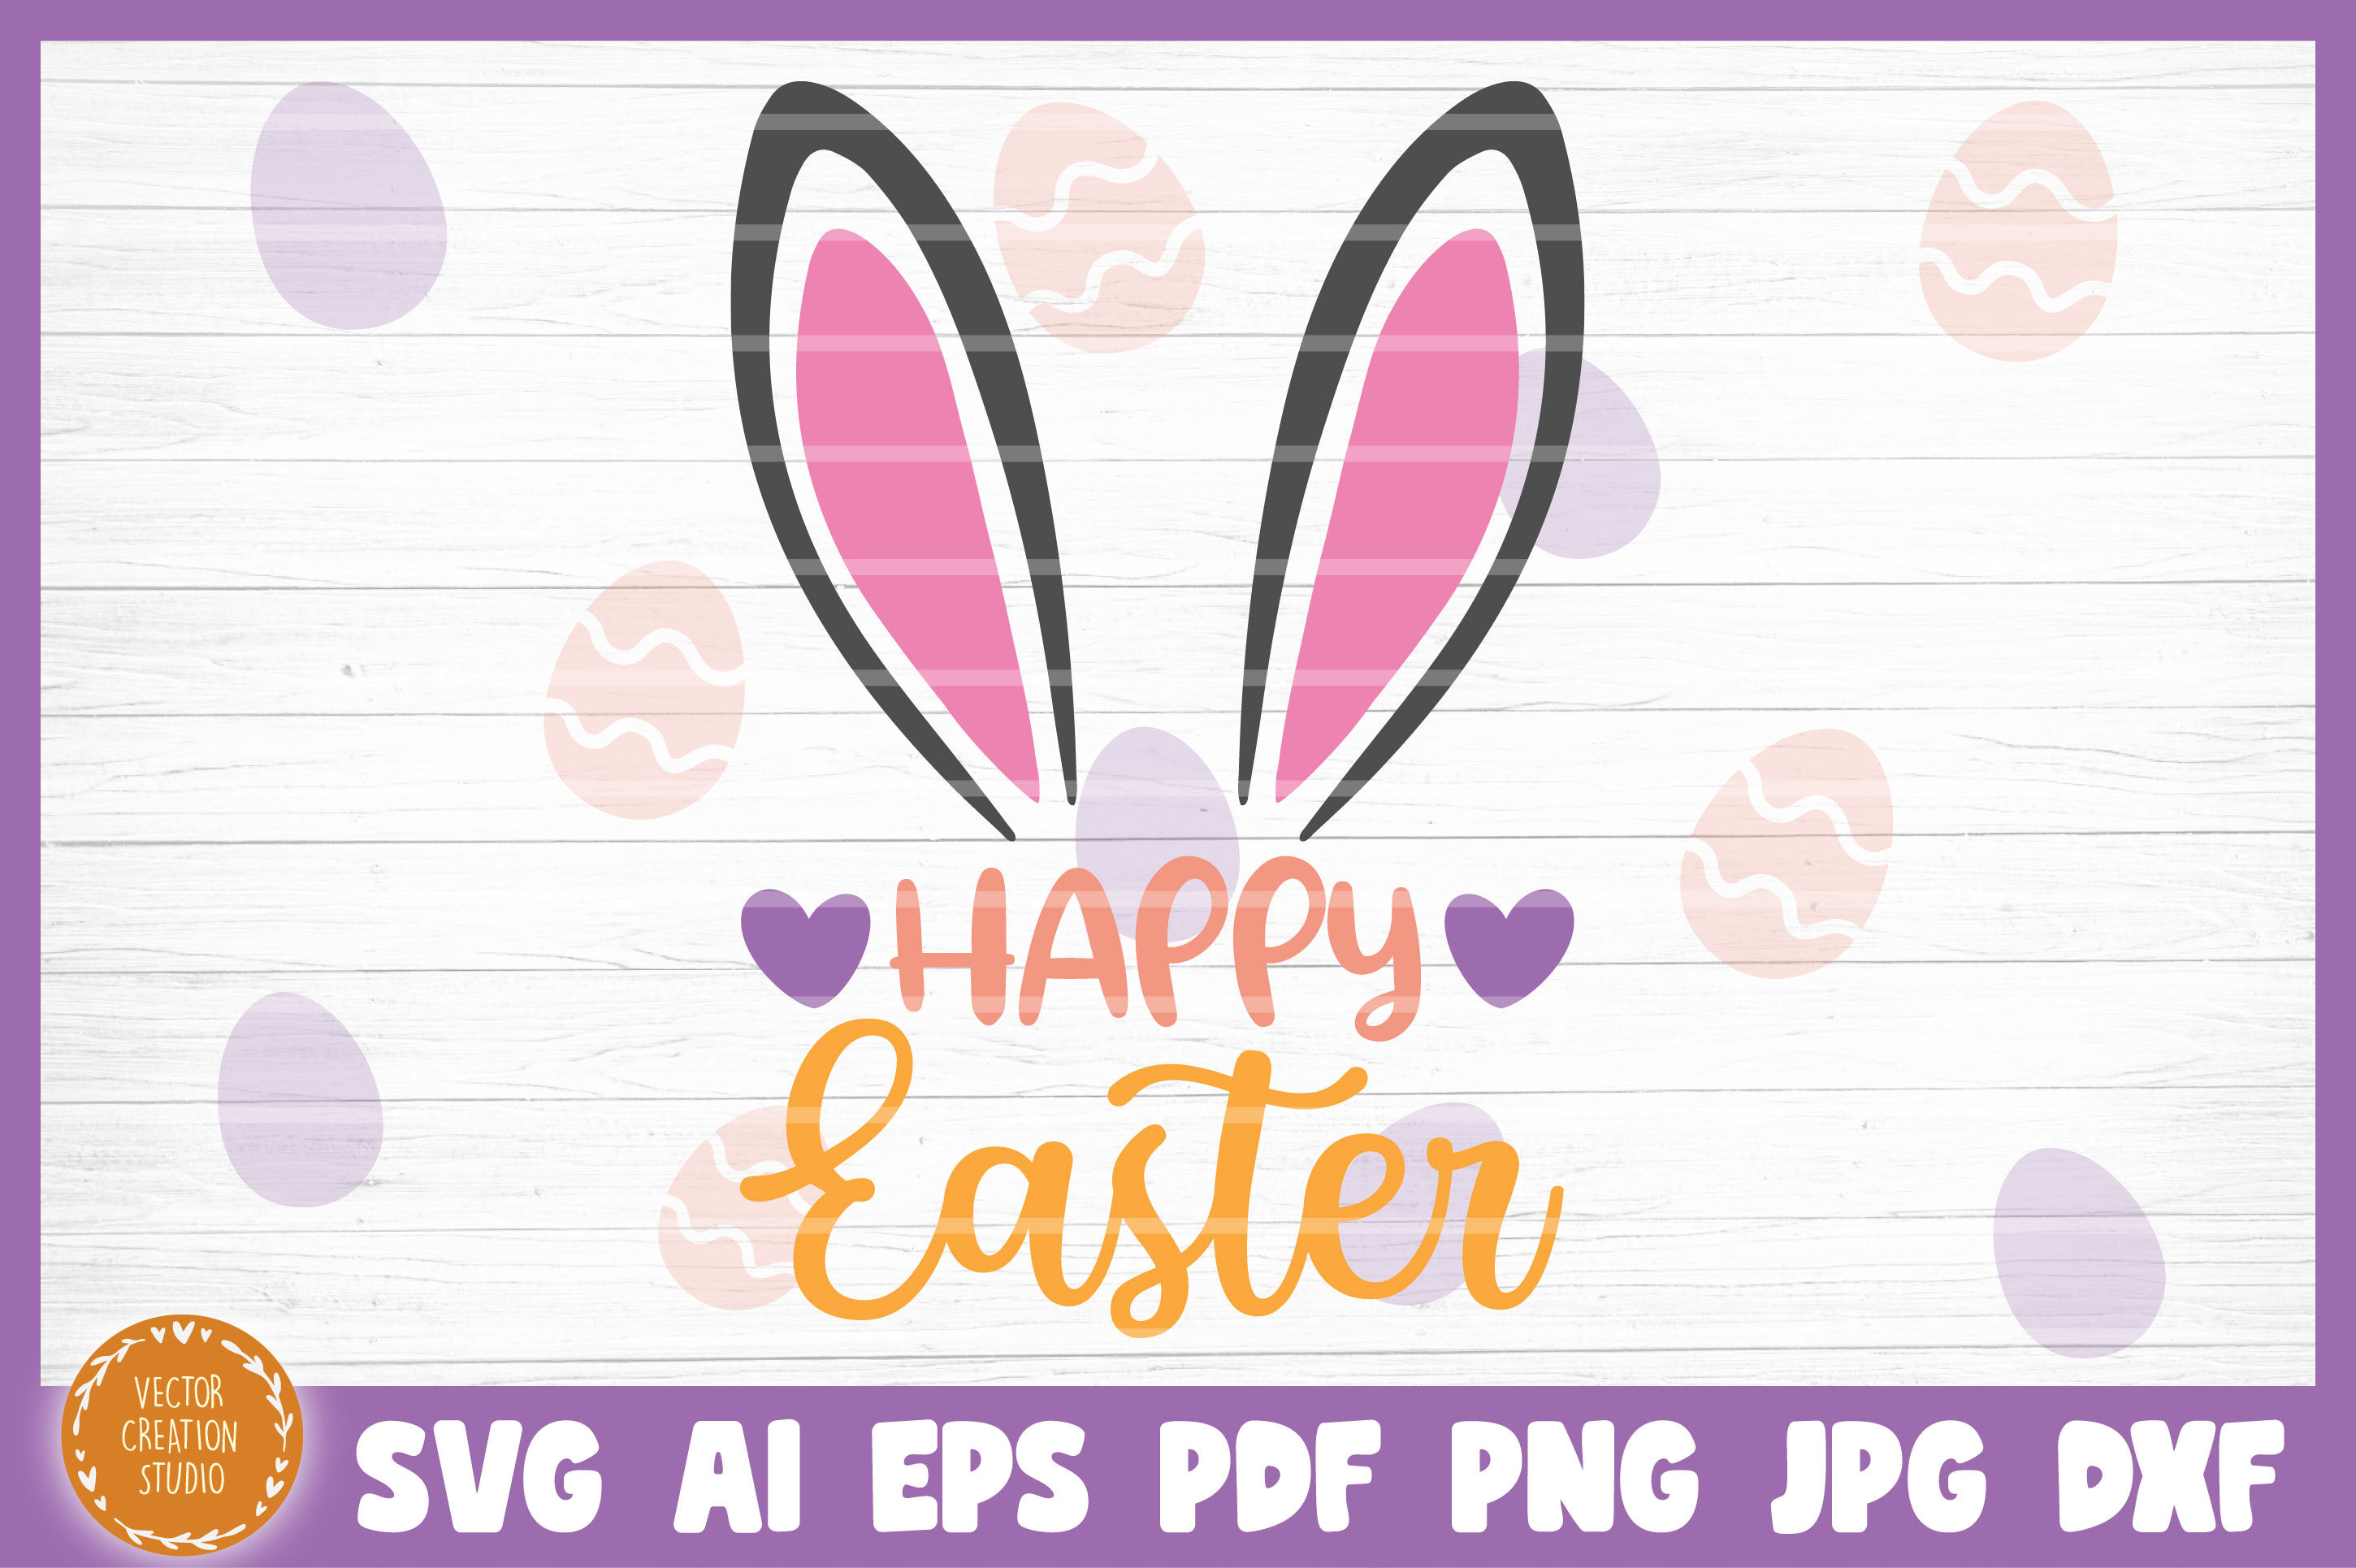 Happy Easter SVG Cut File By VectorCreationStudio | TheHungryJPEG